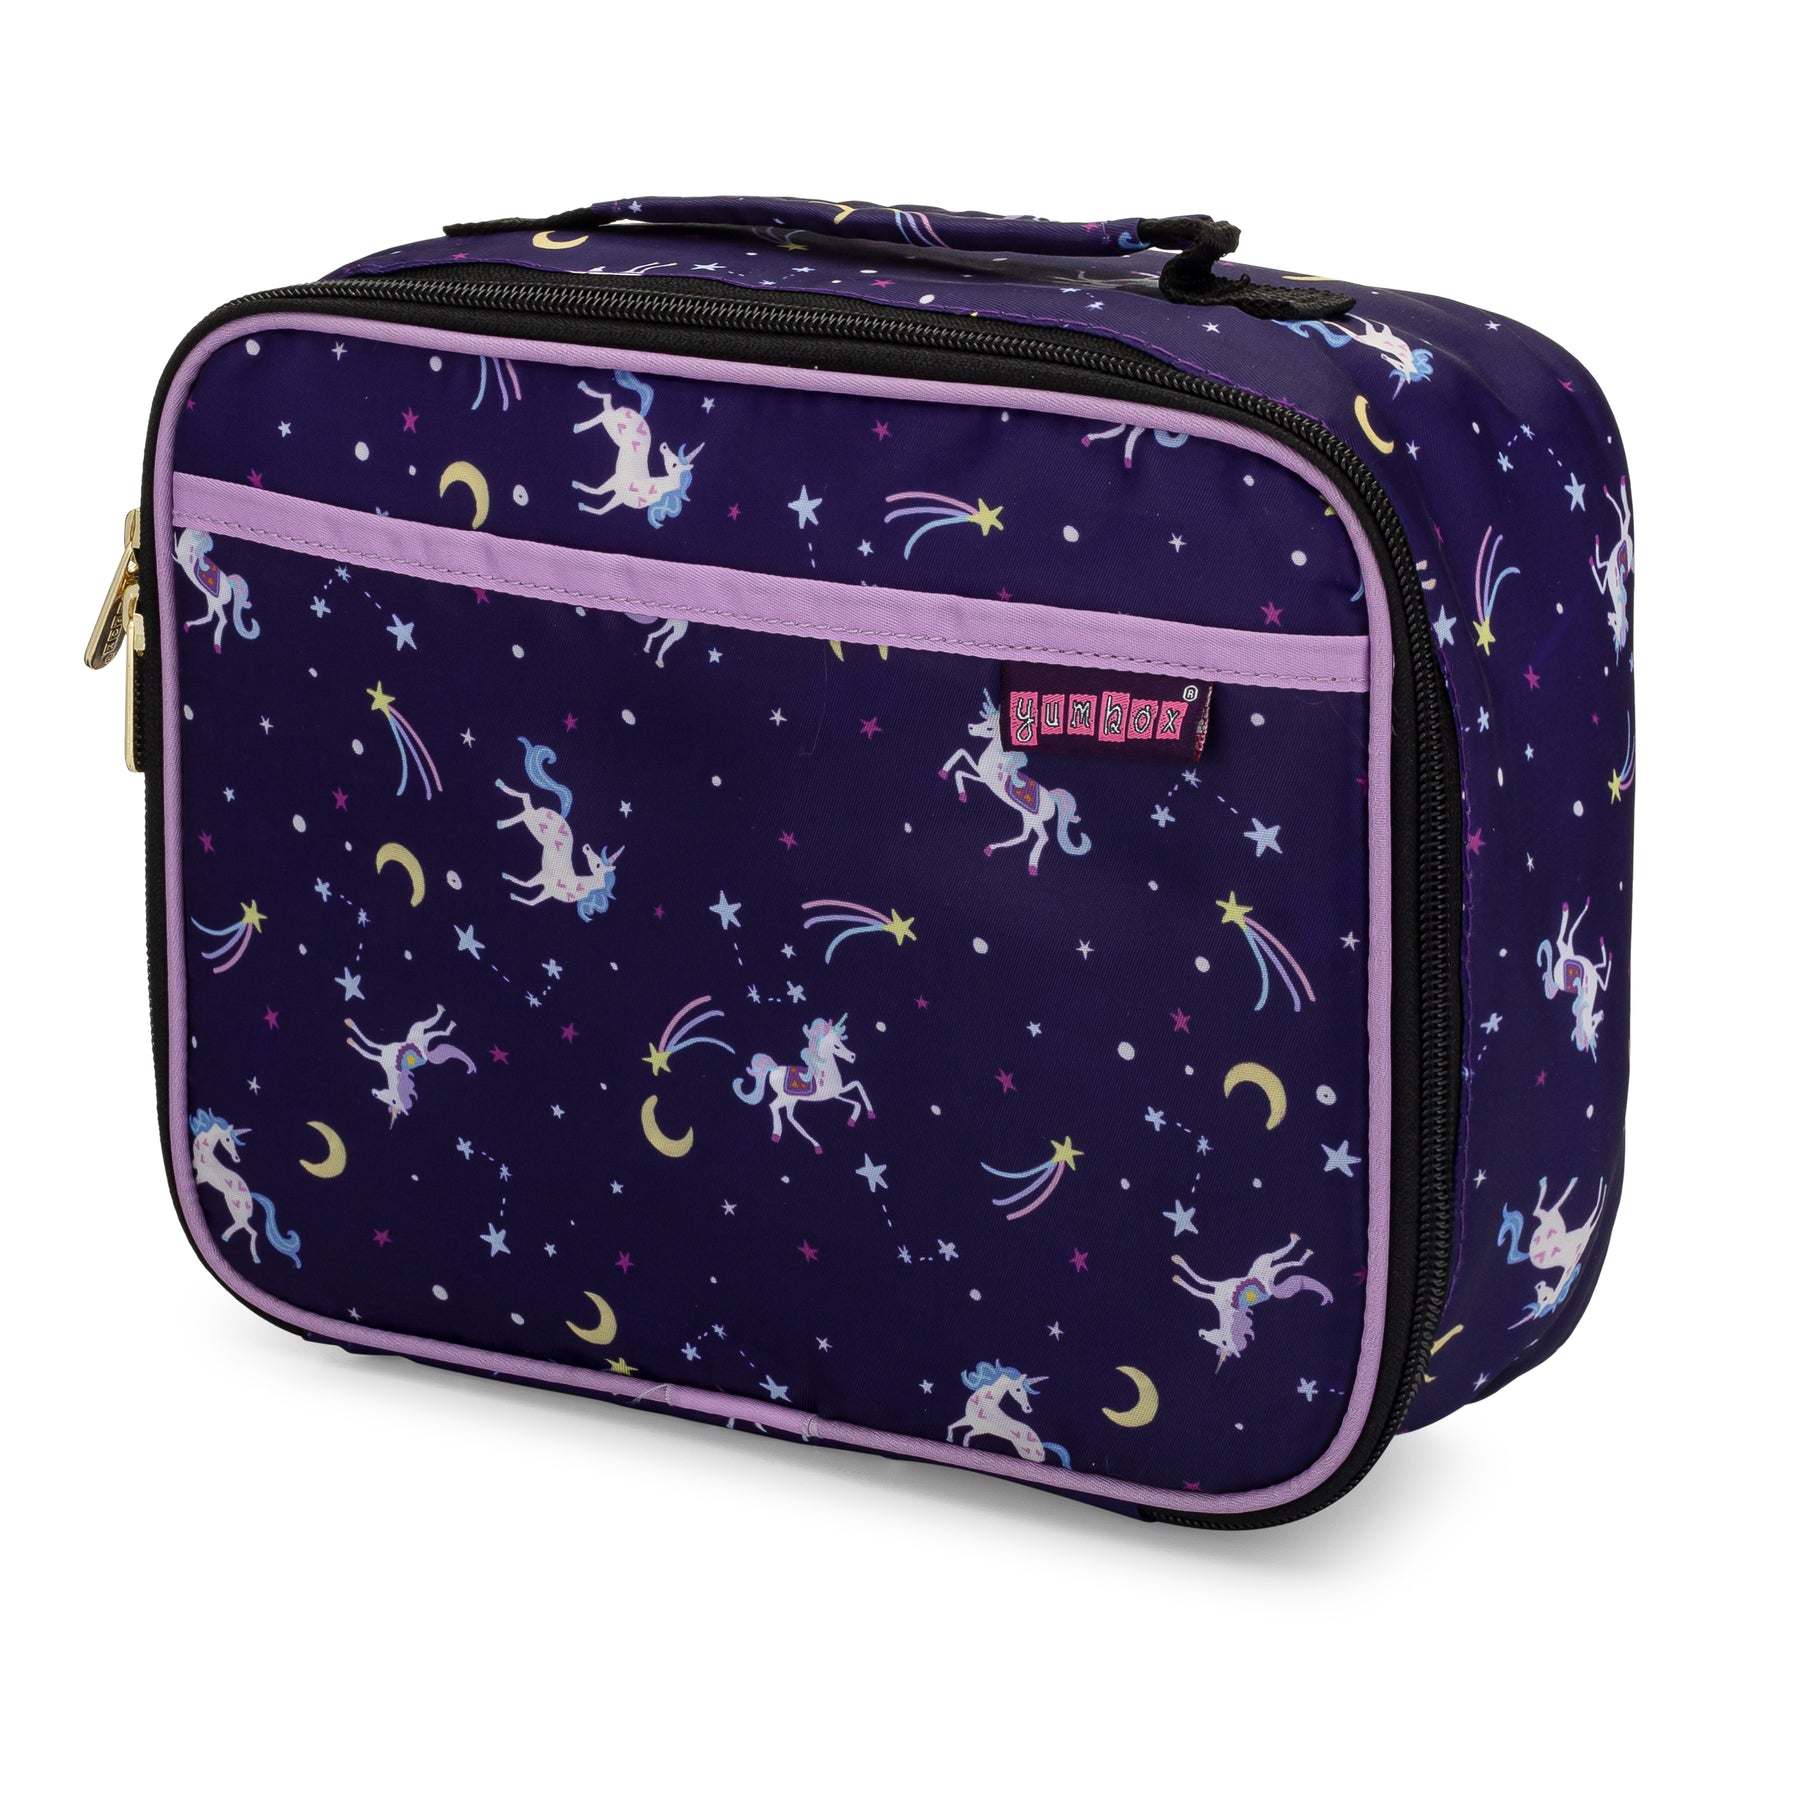 cuesr Purple Unicorn Lunch Box Kids Girls Boys Insulated Cooler Thermal  Cute Lunch Bag Tote for School